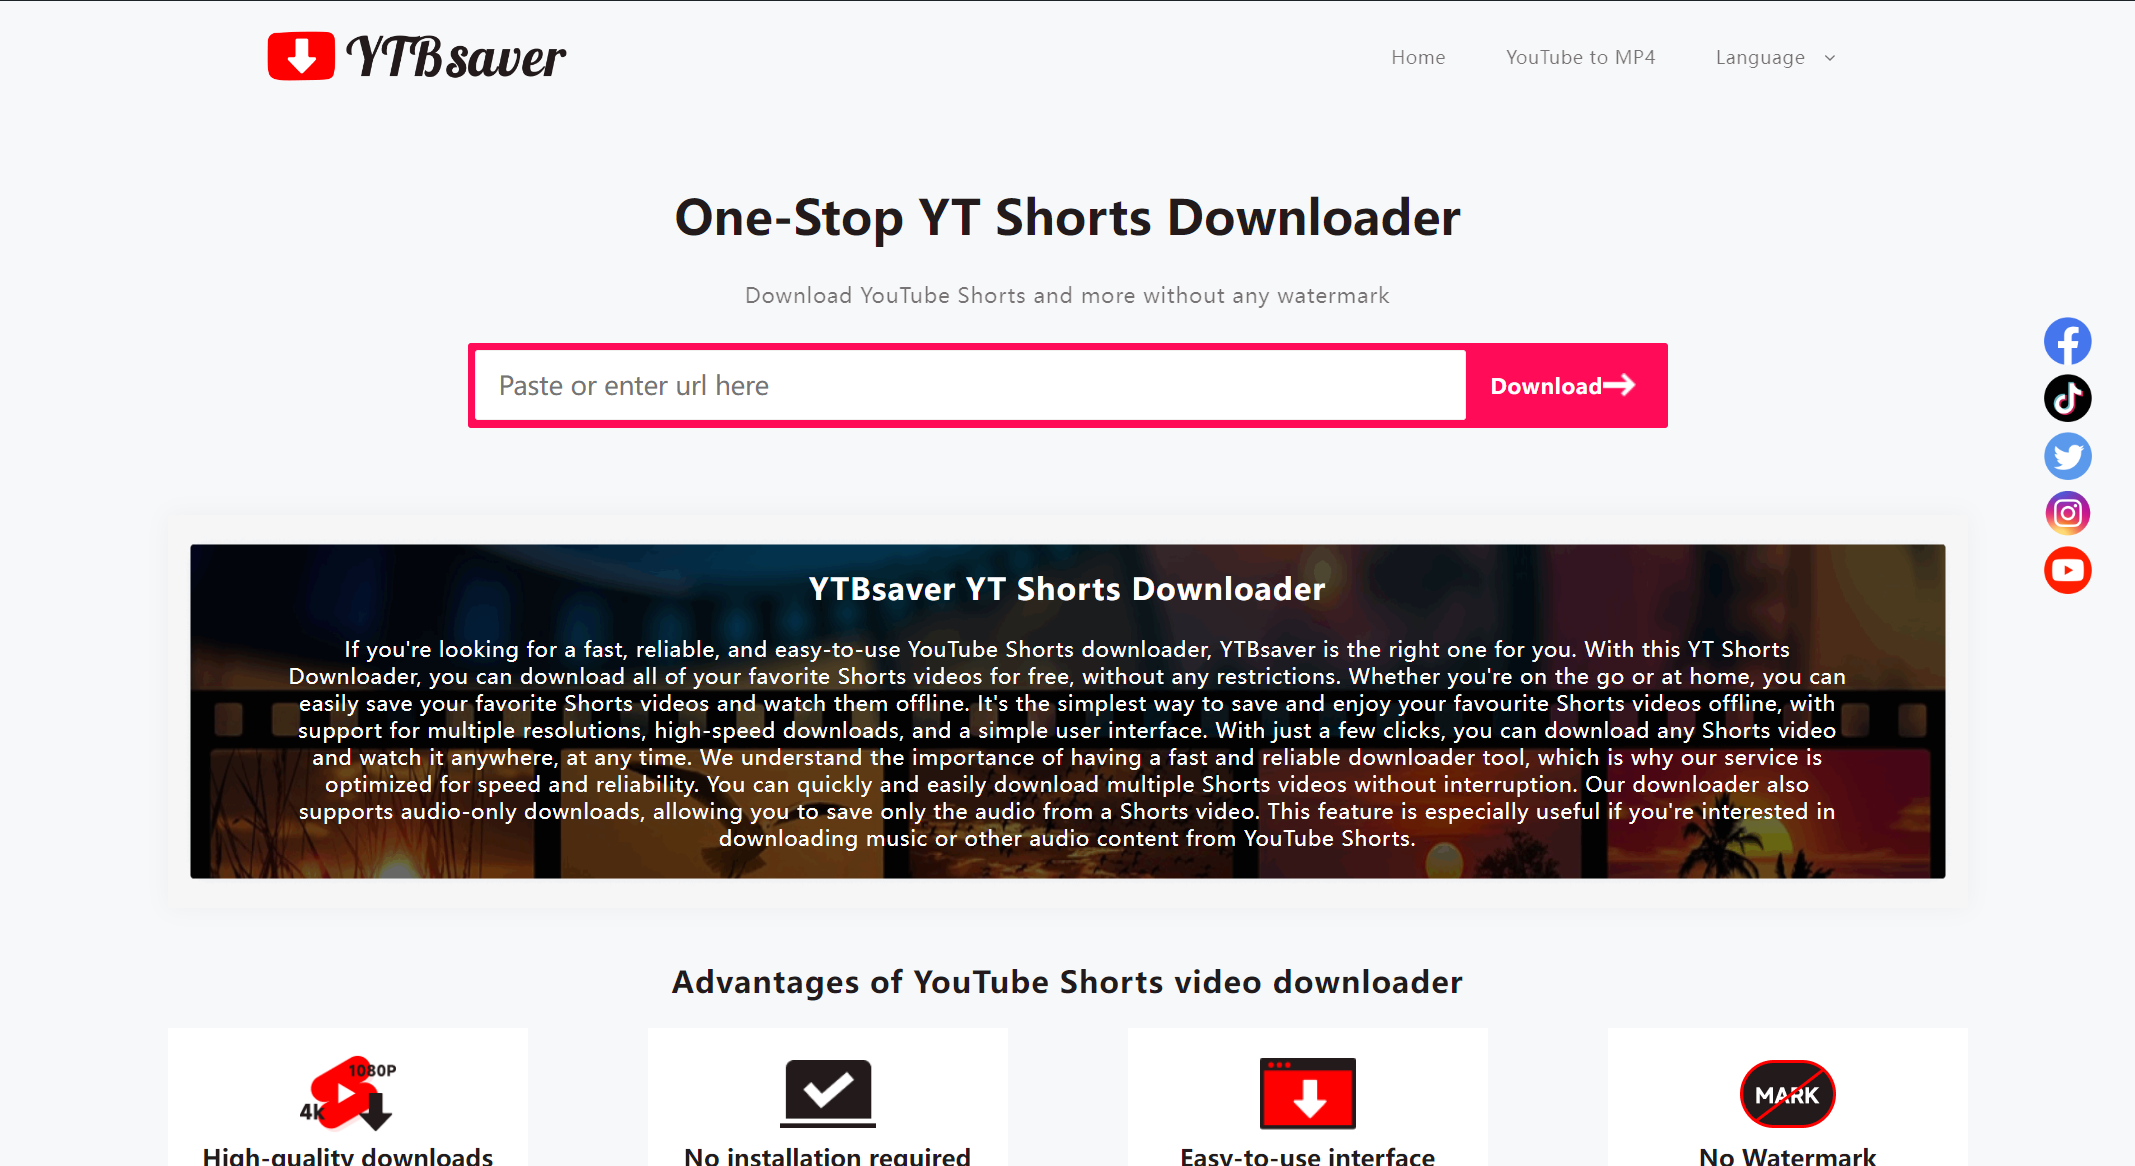 One-Stop YT Shorts Downloader - YTBsaver